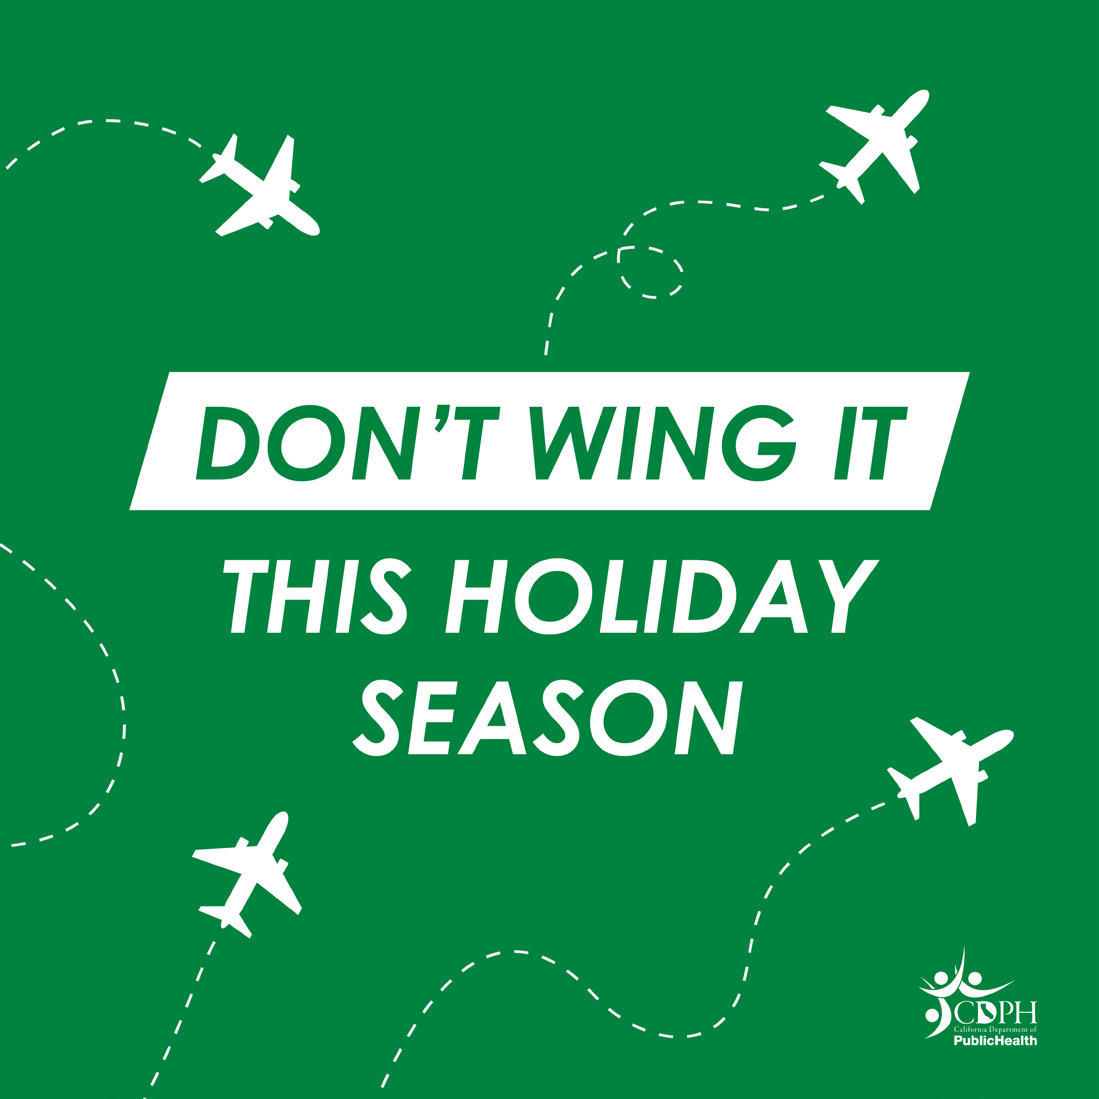 Don't wing it this holiday season